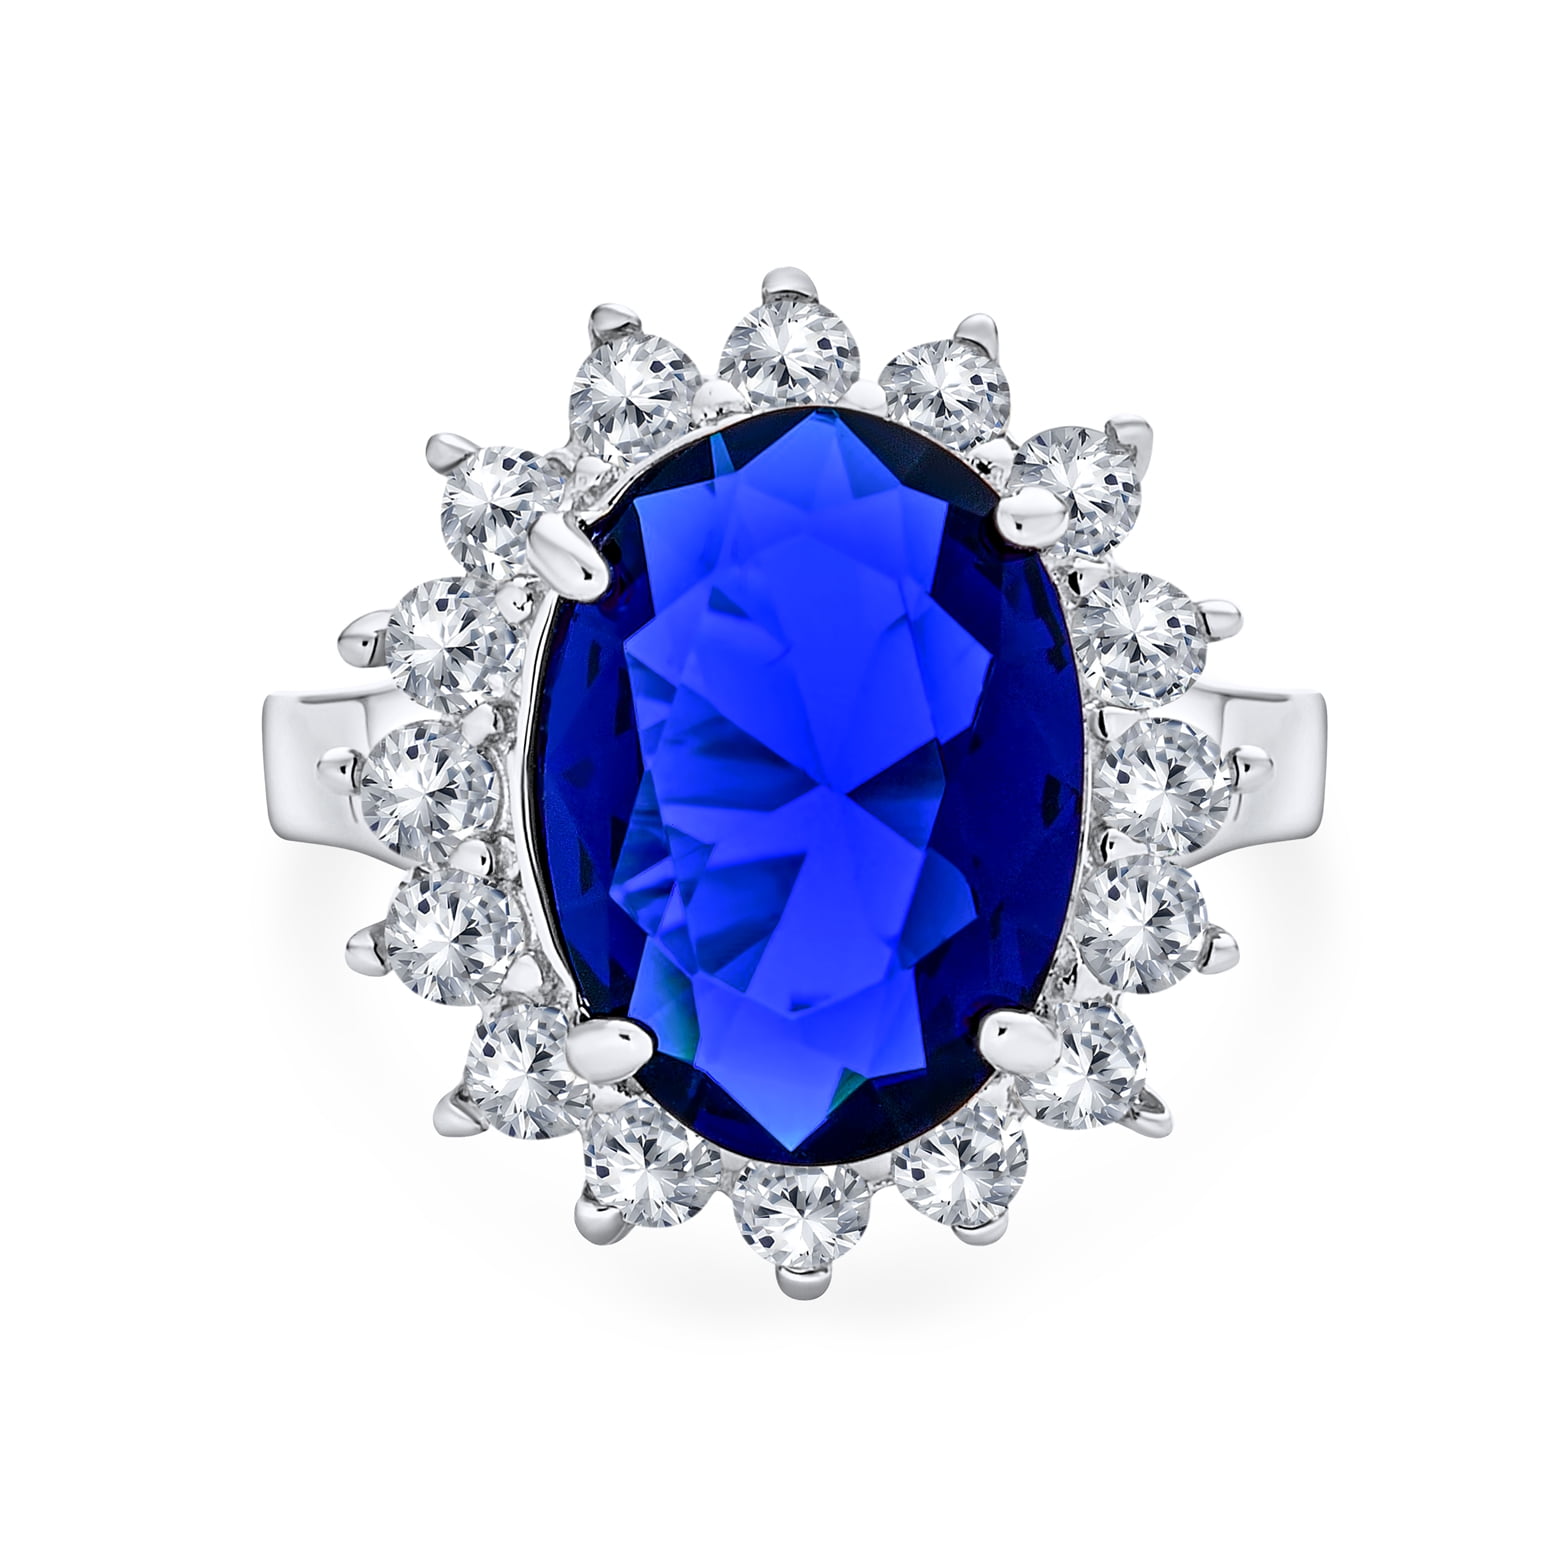 Vintage Art Deco Old Mine Cut CZ With 10.58 Carat Blue Sapphire 925 Silver Ring 